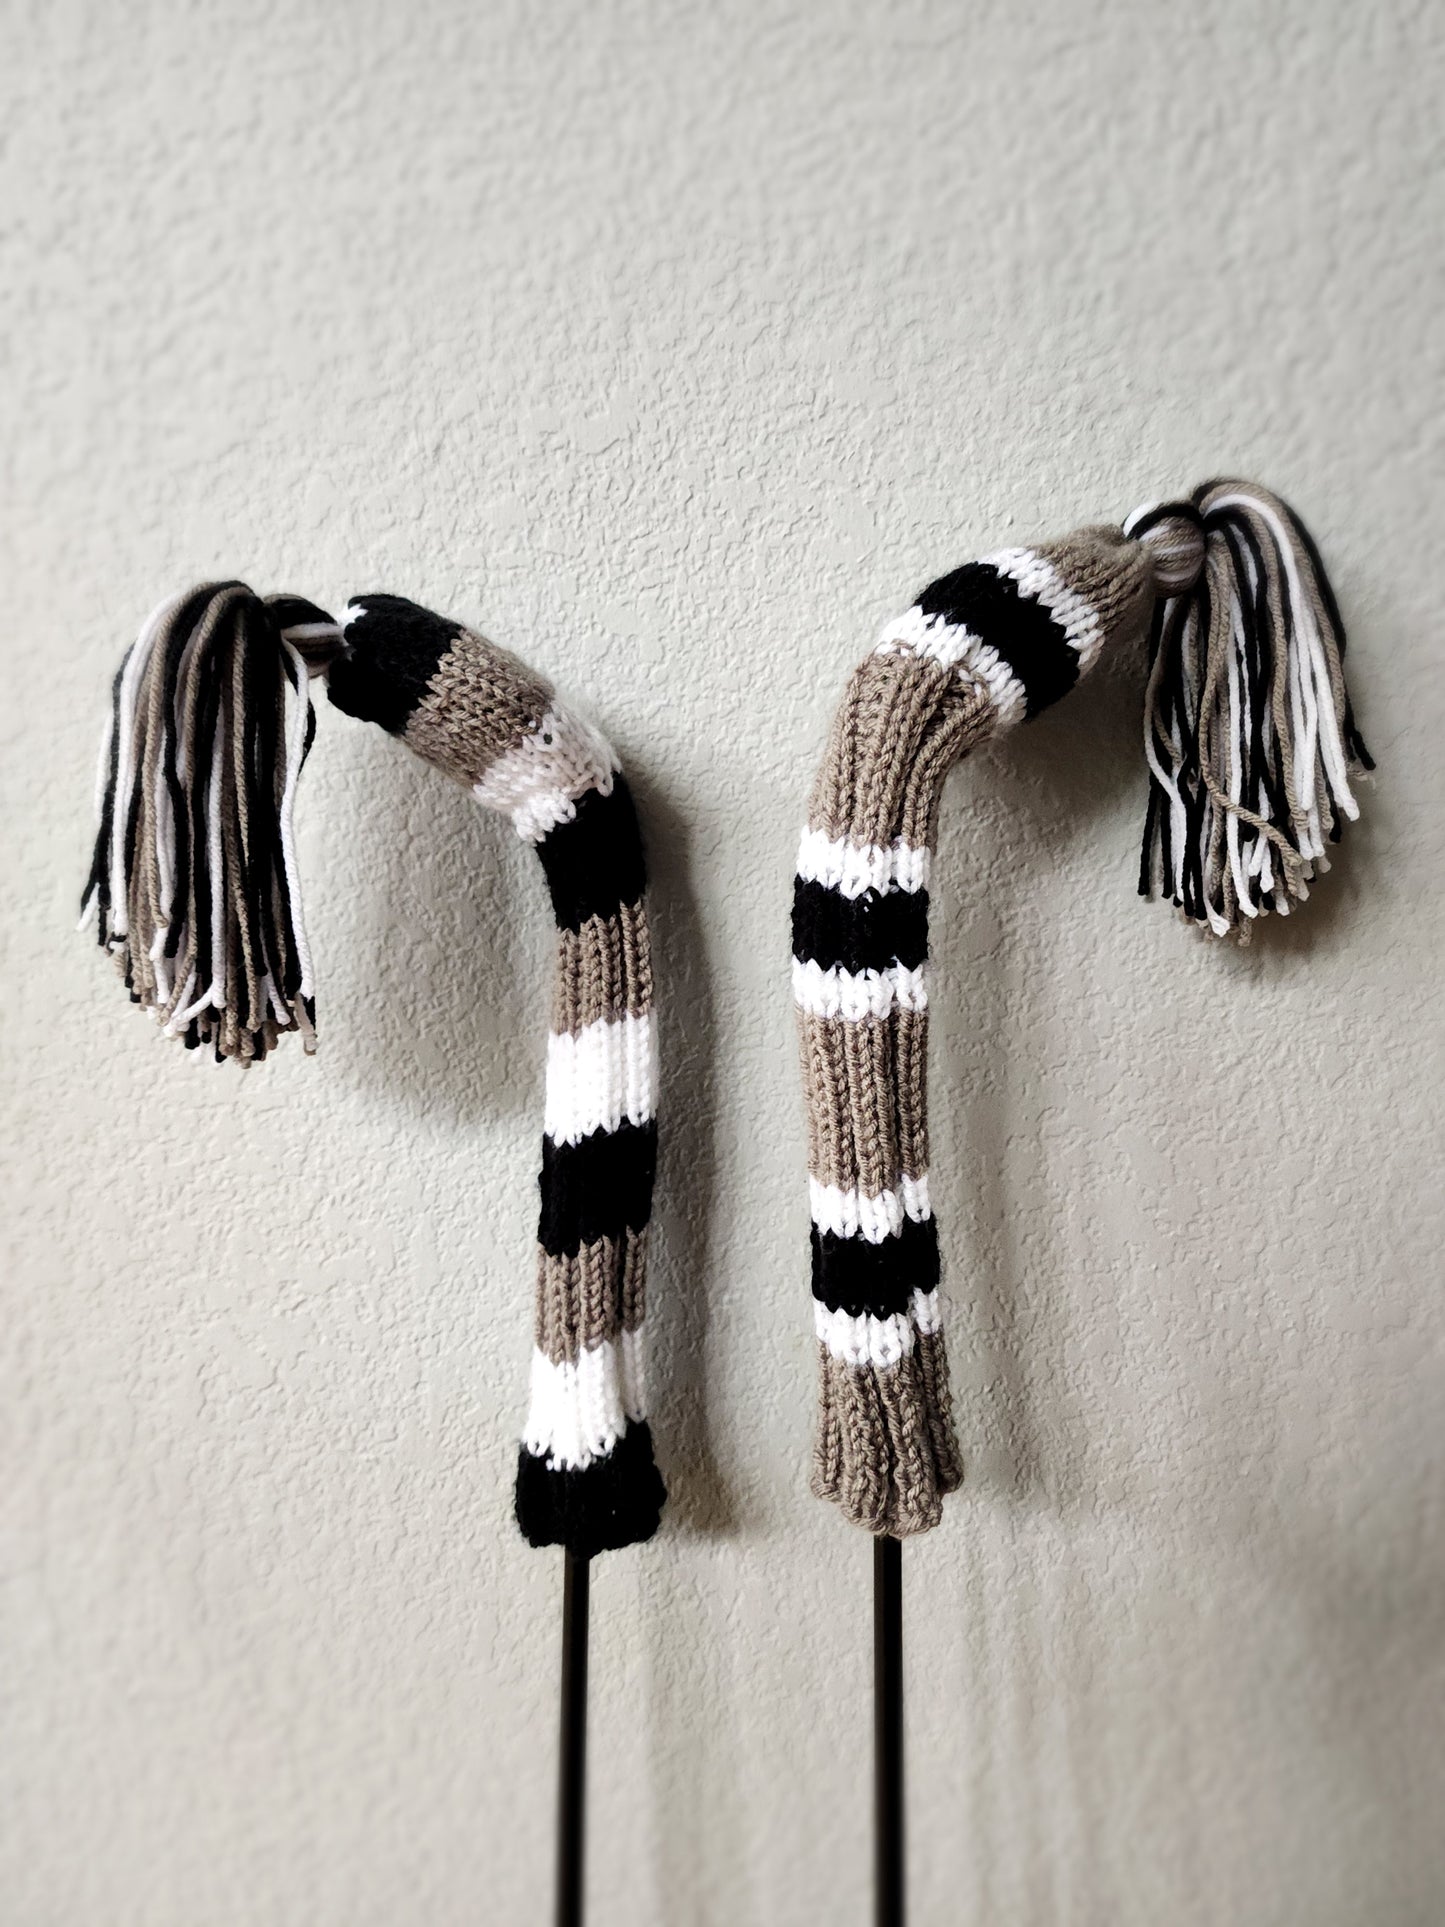 Two Golf Club Head Covers Retro-Vintage Black, Gray & White with Pom Poms for Drivers, Woods